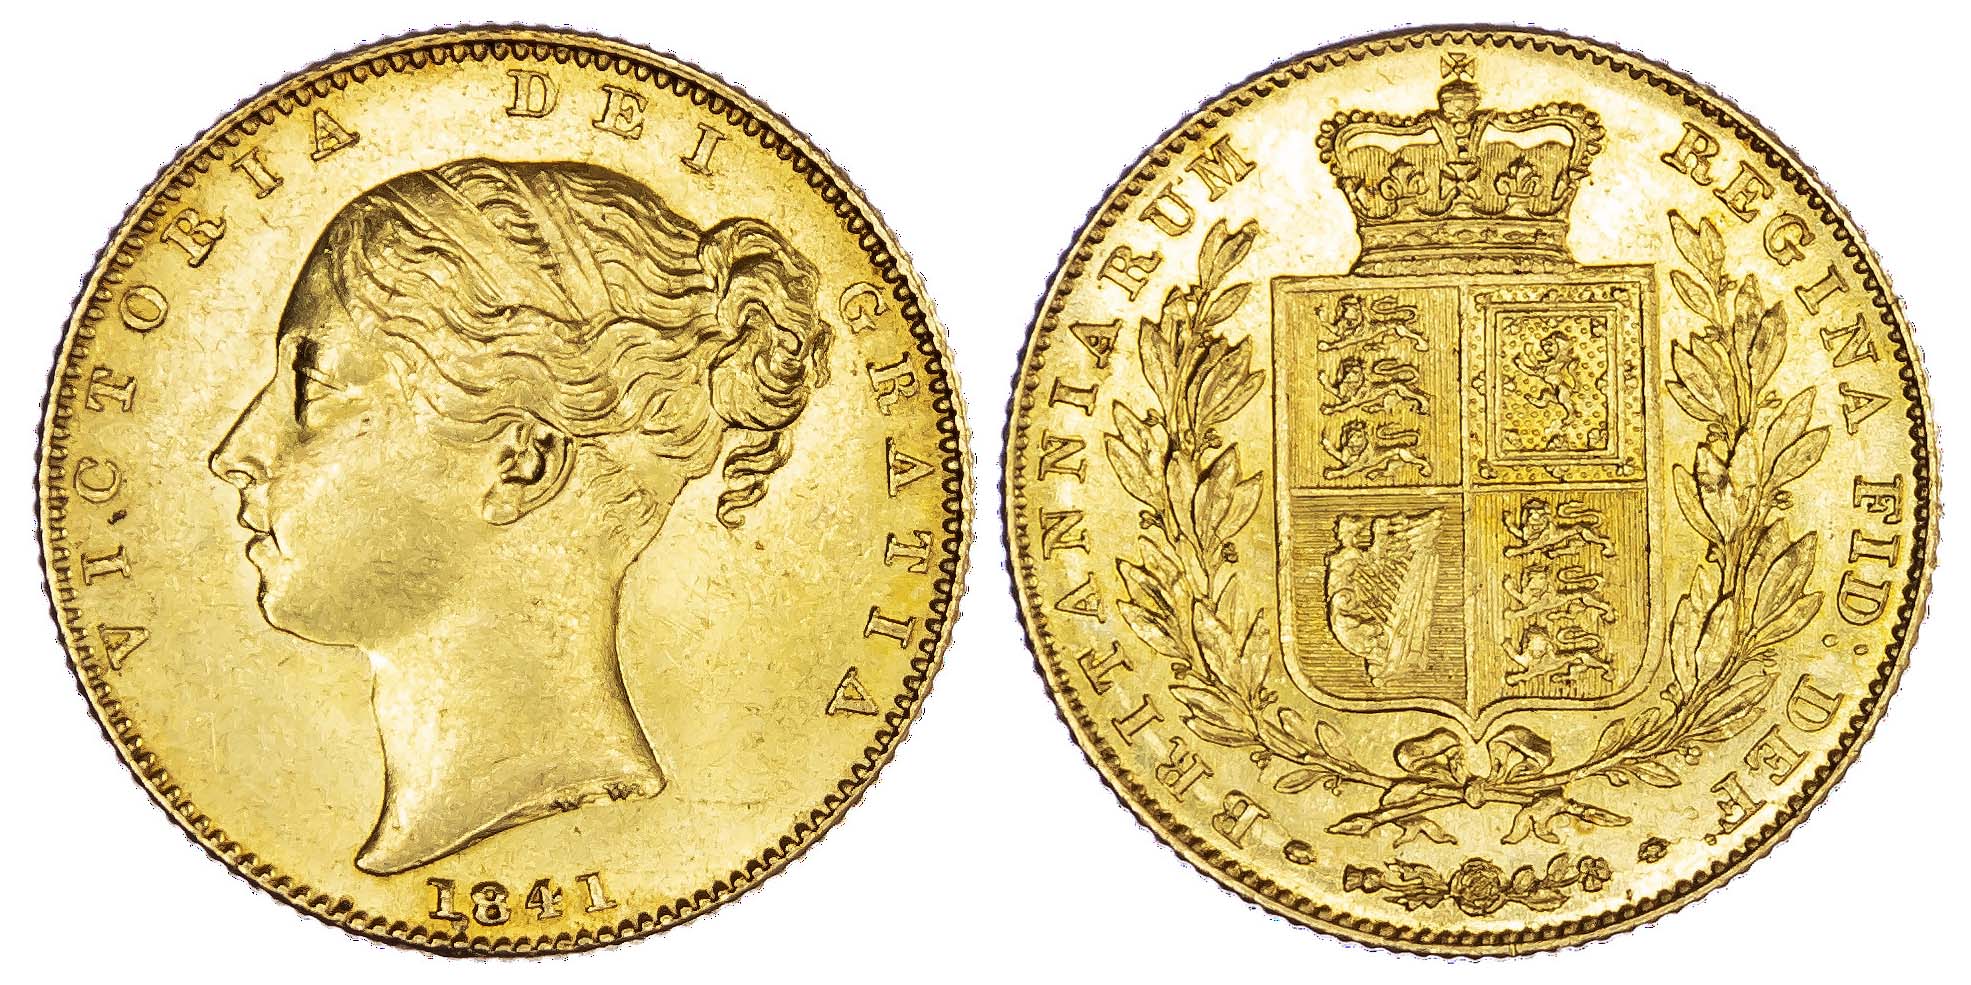 1841 Victoria Sovereign - Key Date - Choice